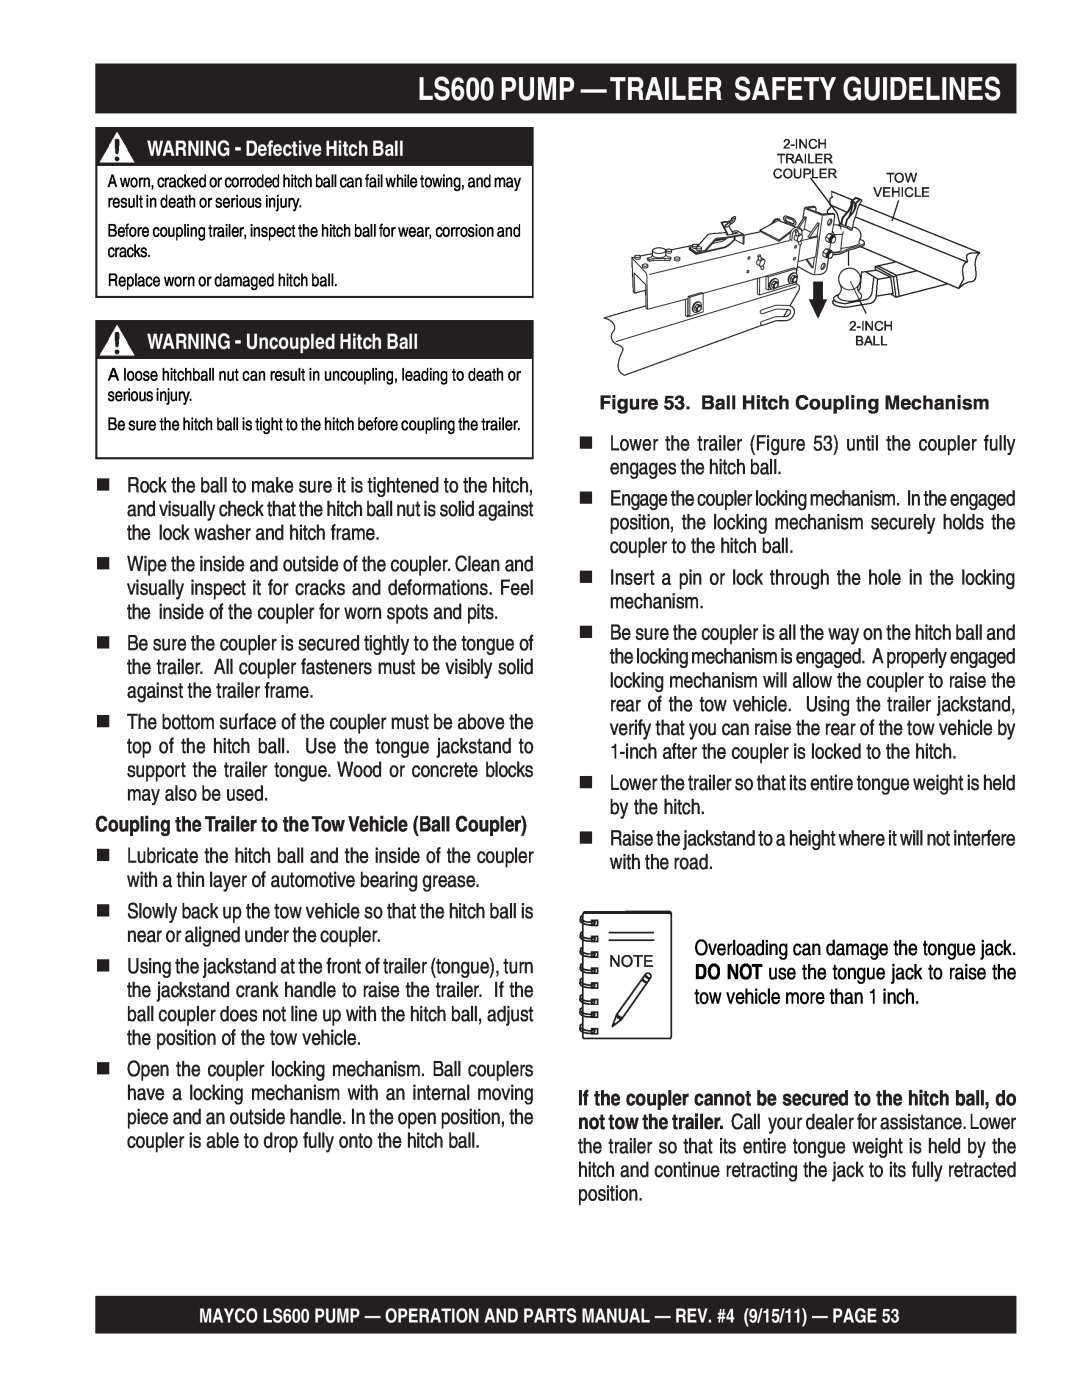 Multiquip manual LS600 PUMP —TRAILERSAFETY GUIDELINES, WARNING - Defective Hitch Ball, WARNING - Uncoupled Hitch Ball 